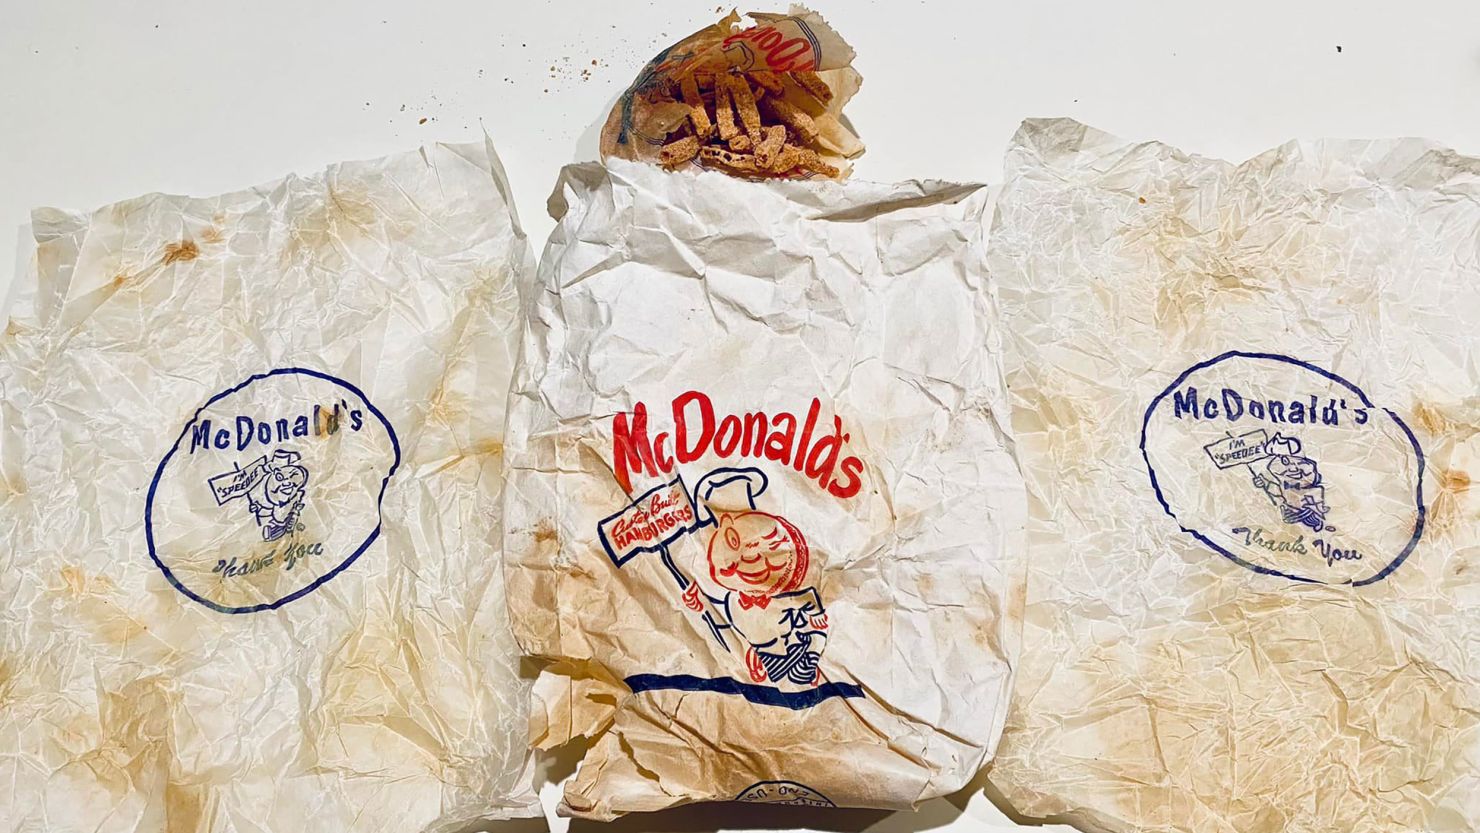 Rob and Gracie Jones found two hamburger wrappers and a half-eaten order of fries in a McDonald's bag behind their bathroom wall.